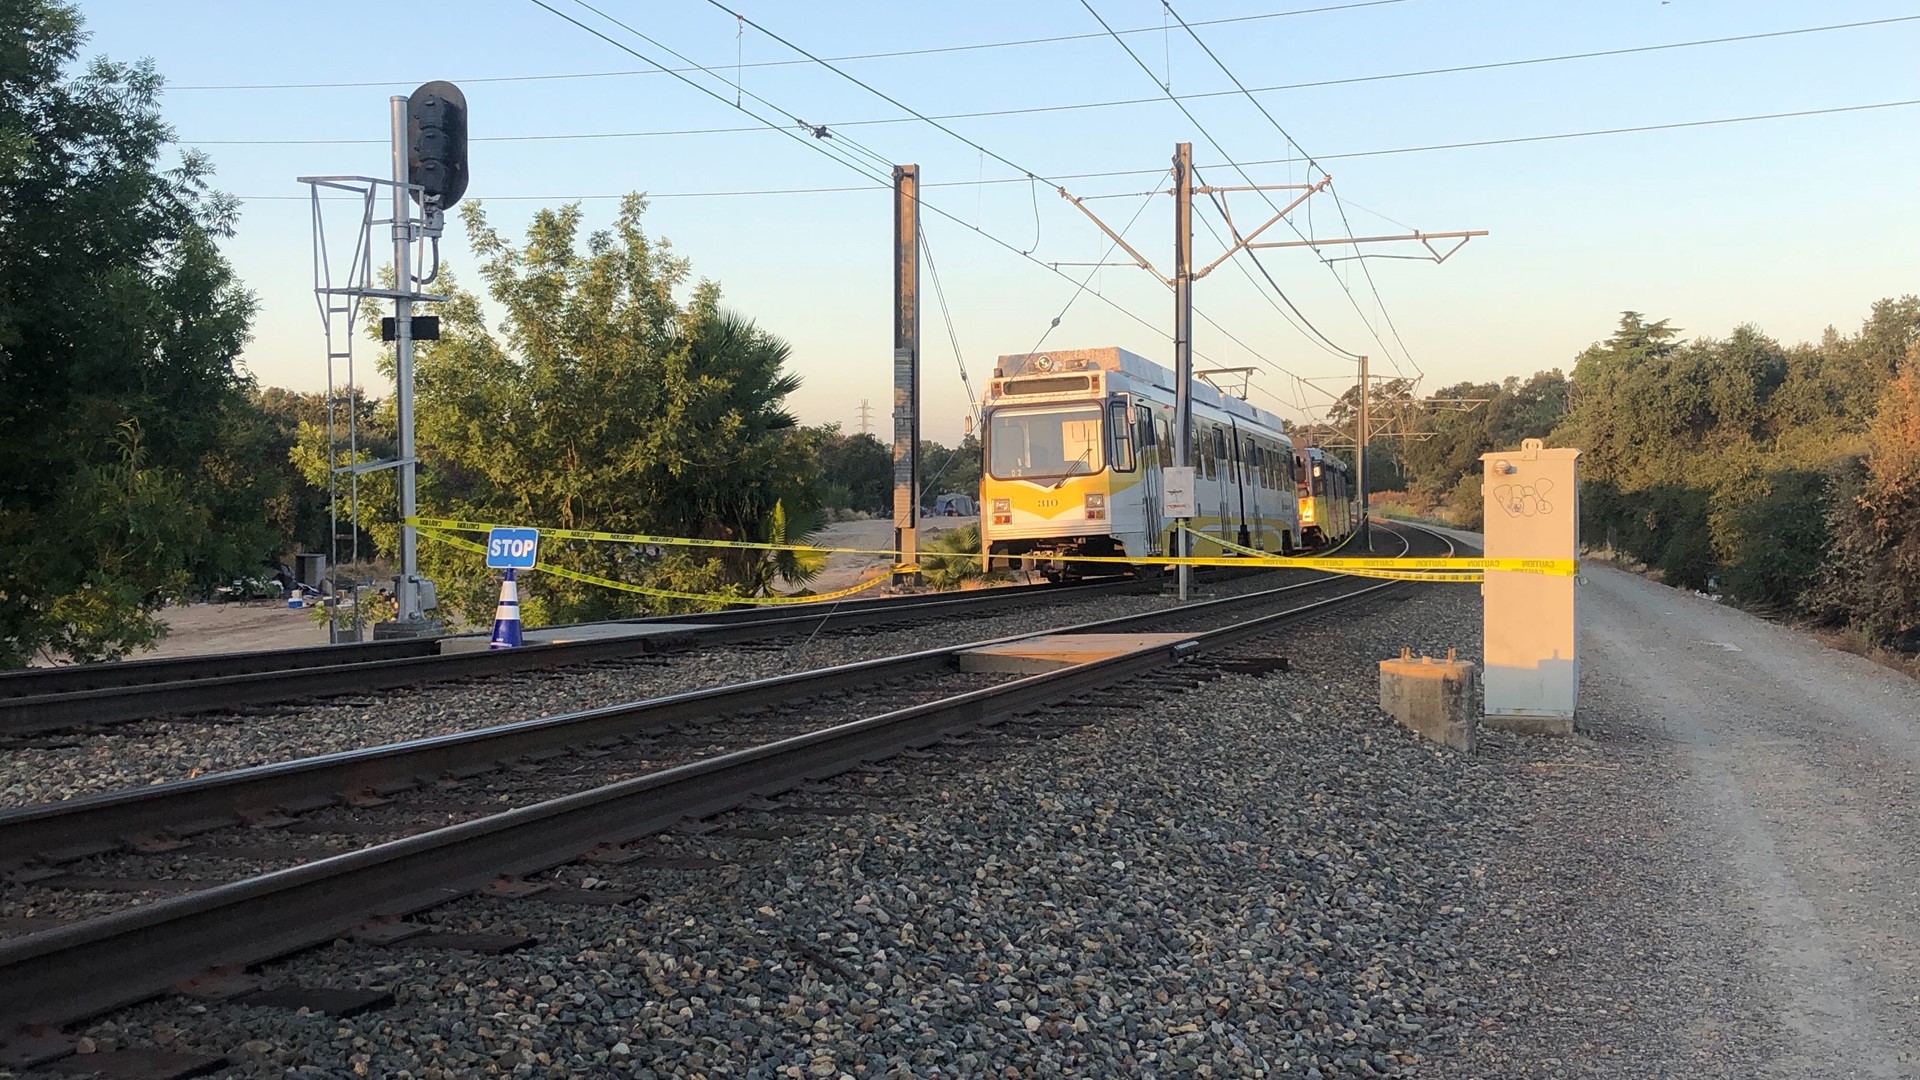 An investigation is underway to determine why a Sacramento light rail commuter train struck a maintenance train, injuring 27 people on board.